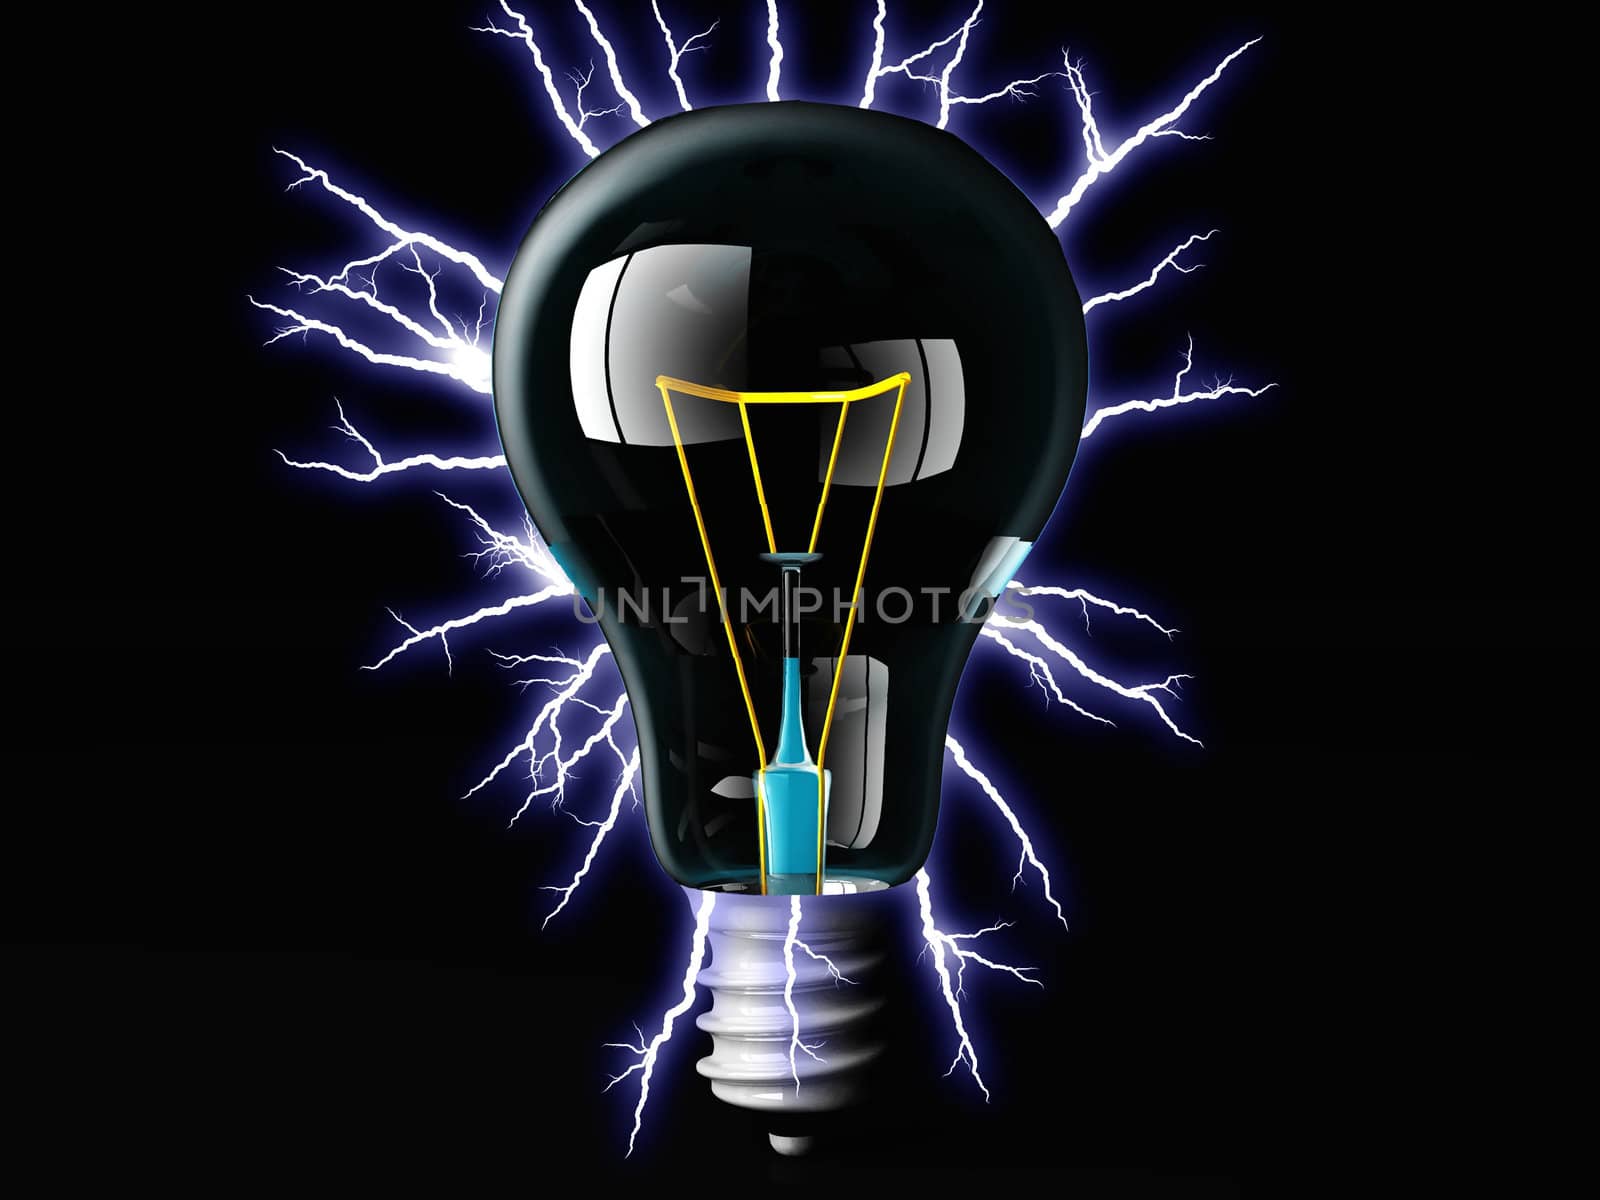 incandescent light bulb and electric arc by njaj